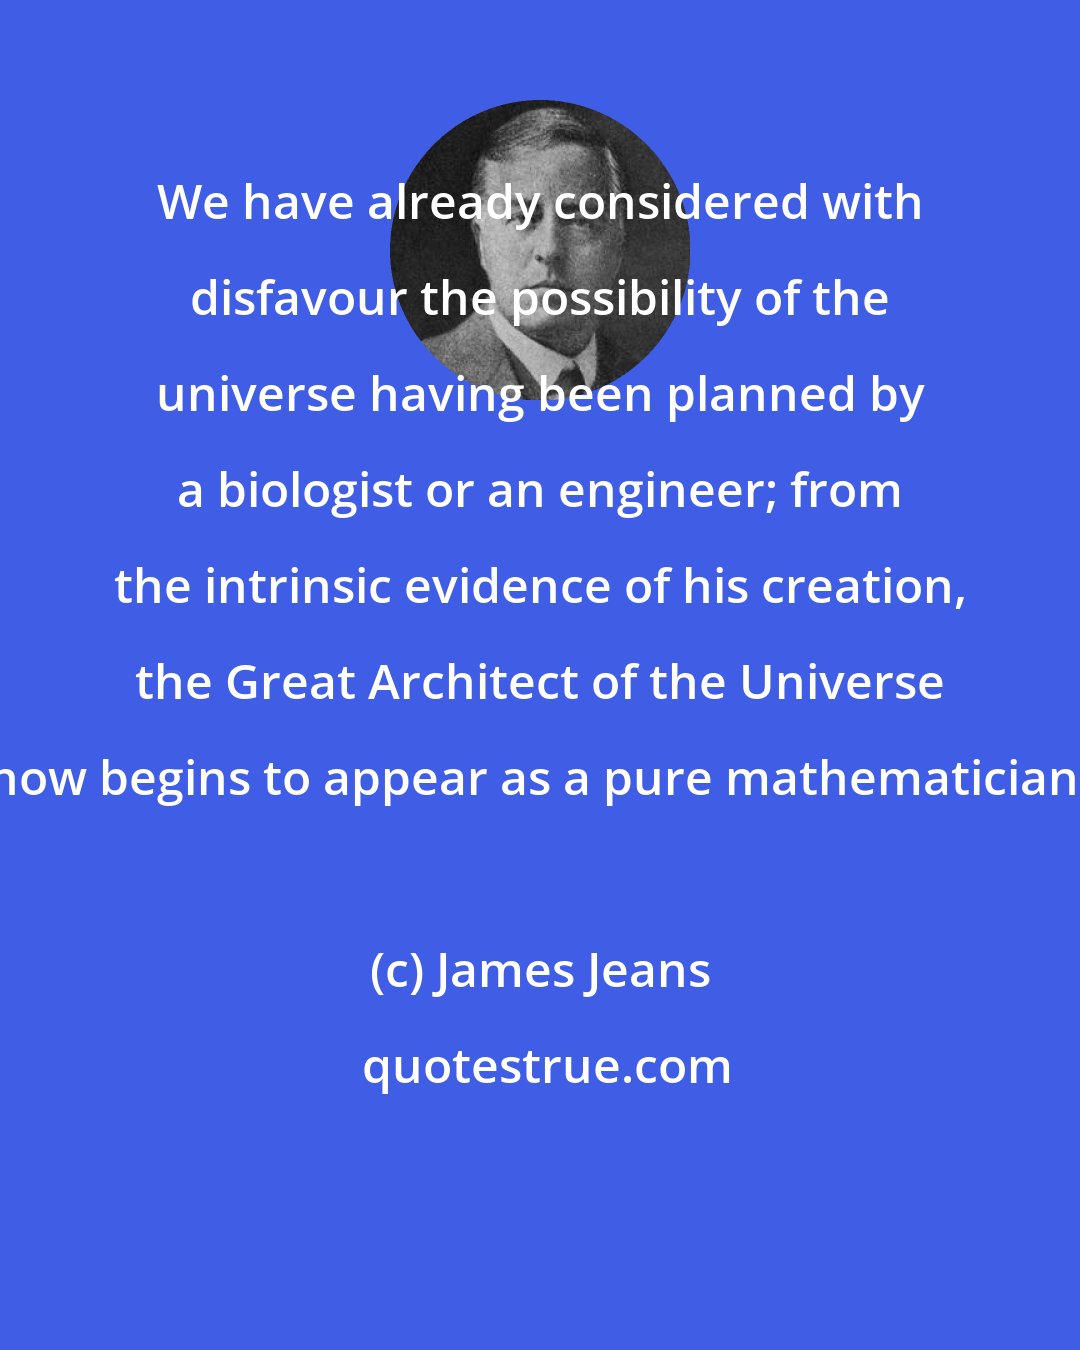 James Jeans: We have already considered with disfavour the possibility of the universe having been planned by a biologist or an engineer; from the intrinsic evidence of his creation, the Great Architect of the Universe now begins to appear as a pure mathematician.